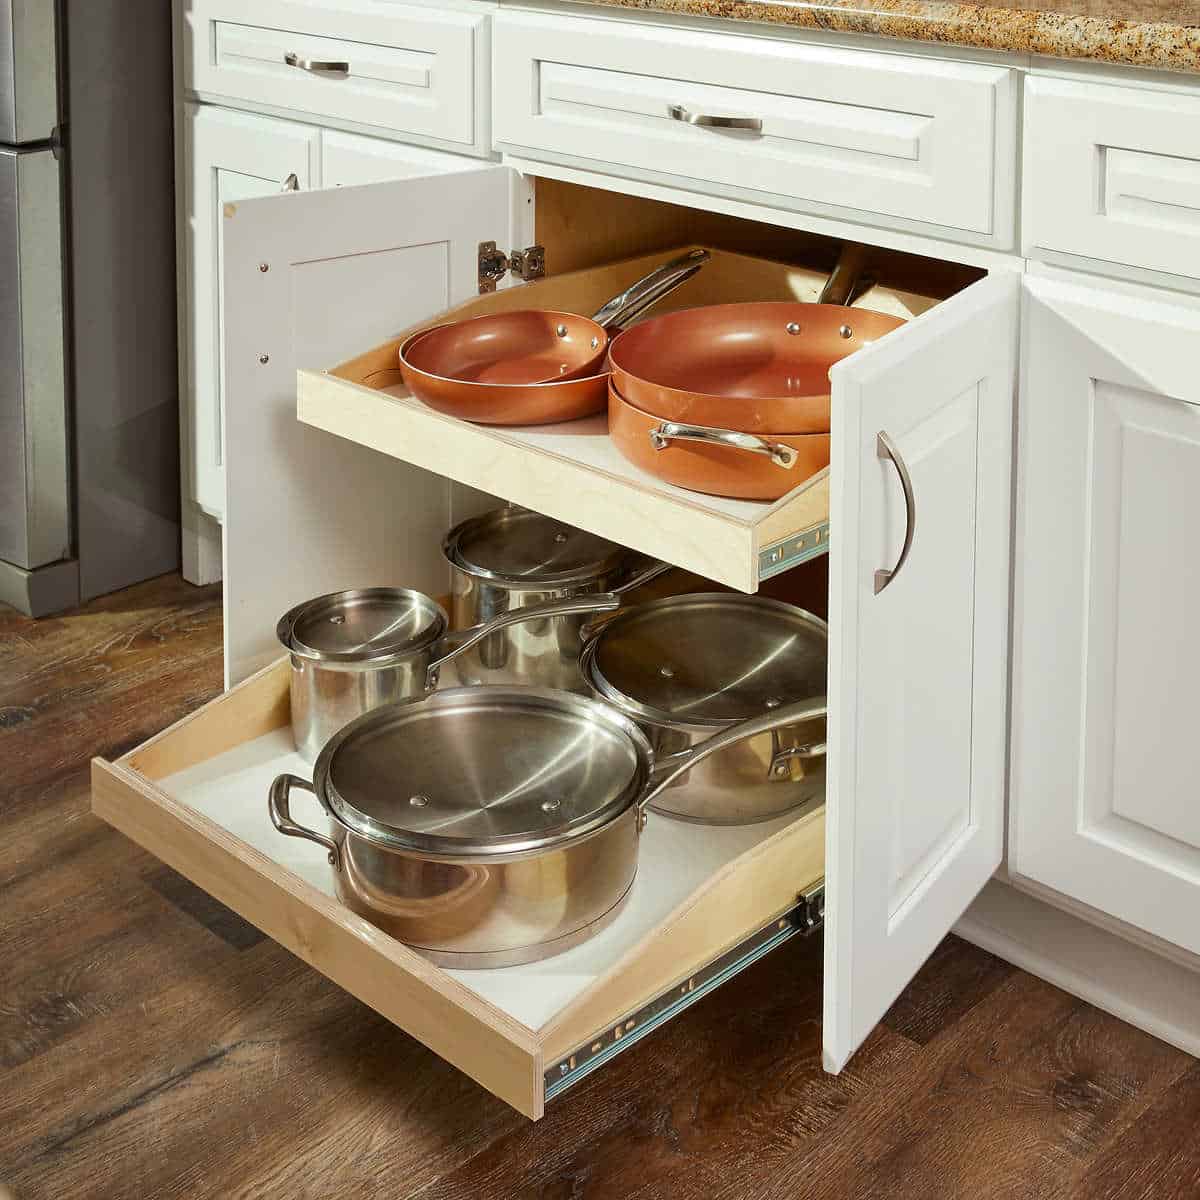 A pull-out drawer holding some utensils.